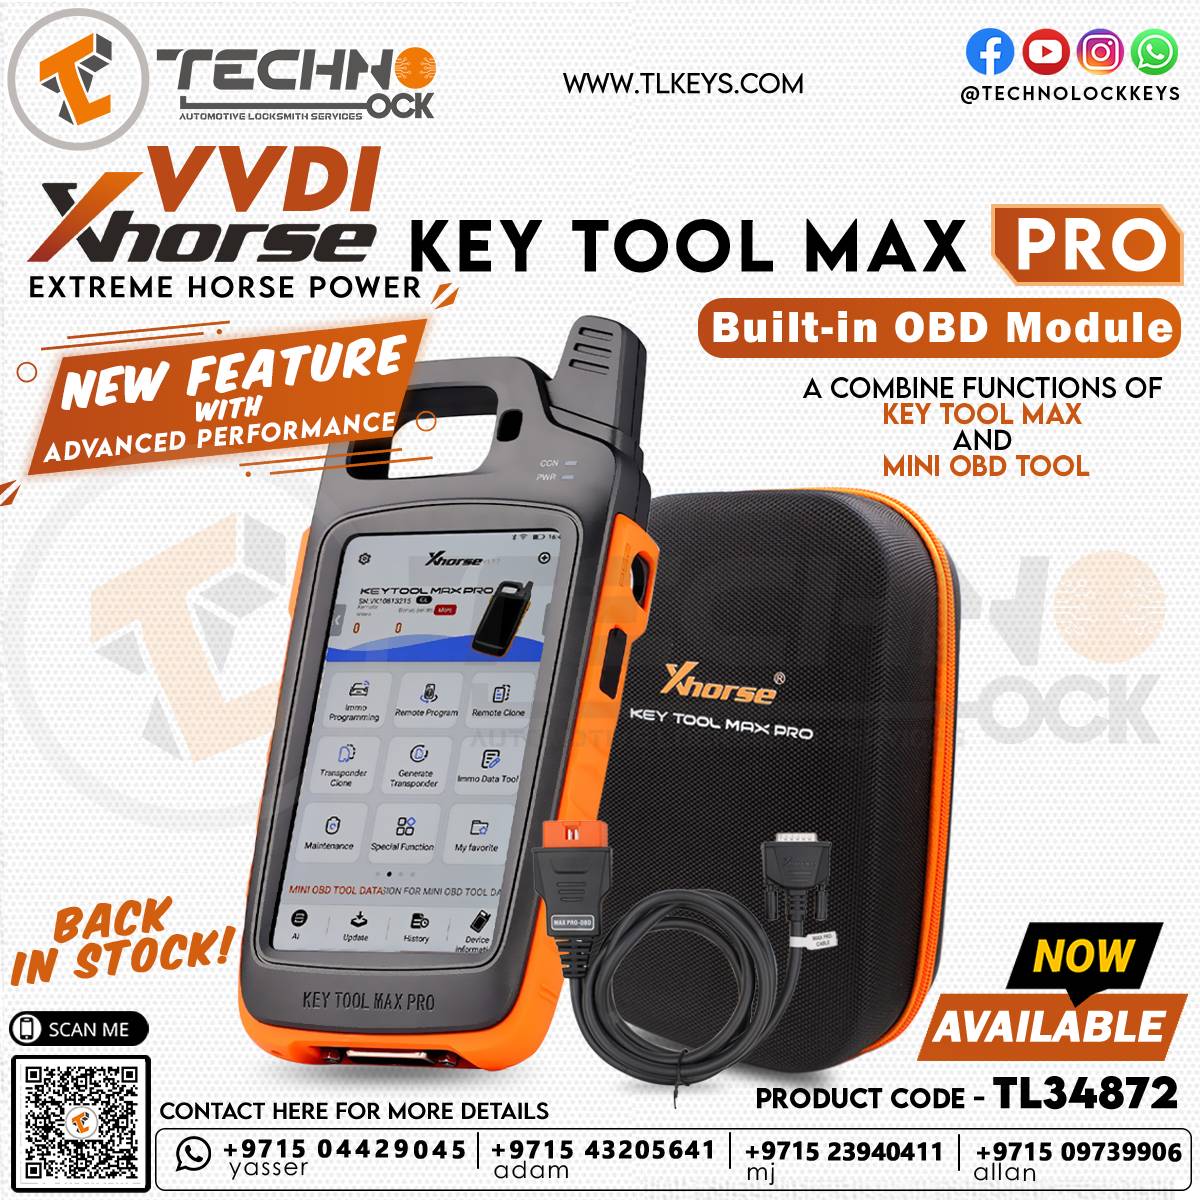  an OBD cable that allows programming directly through Key Tool Max Pro instead of requiring a separate programmer 